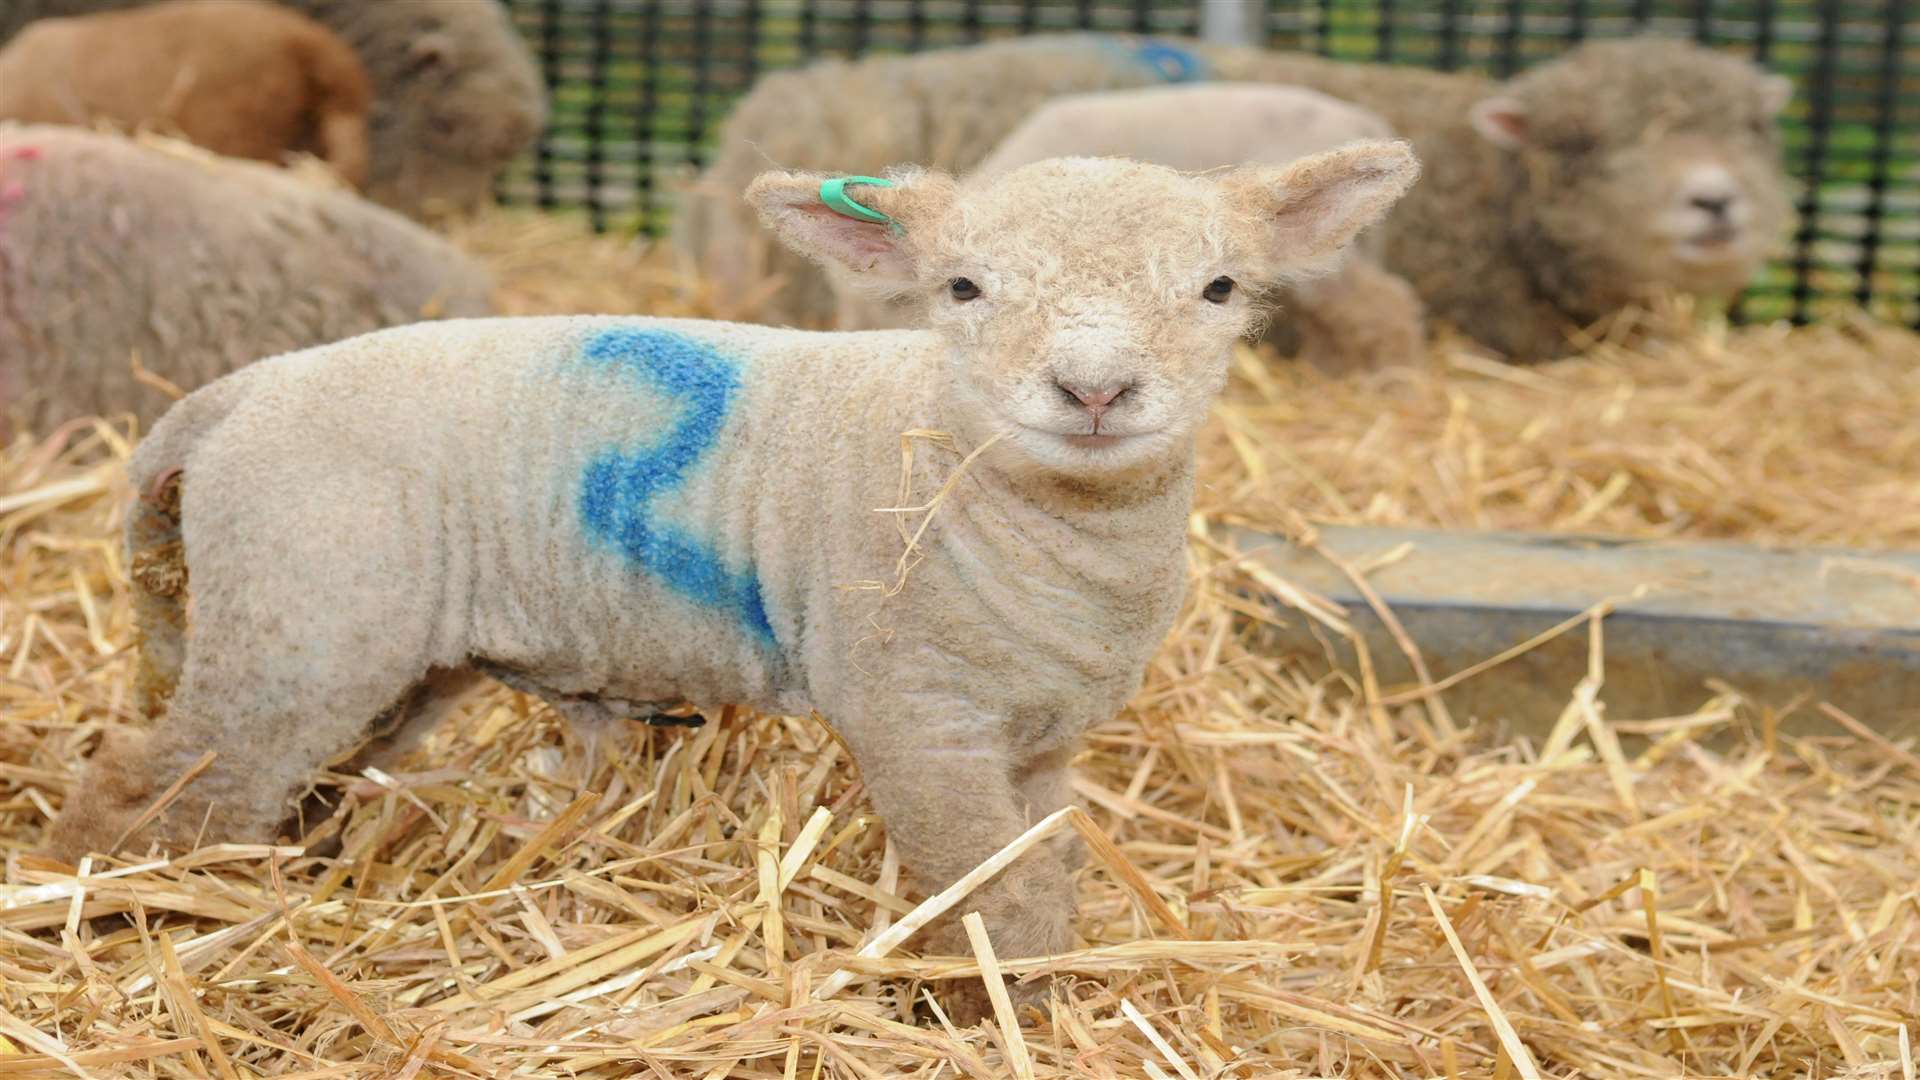 Got to love the lambs: a new arrival at the Rare Breeds Centre in Woodchurch